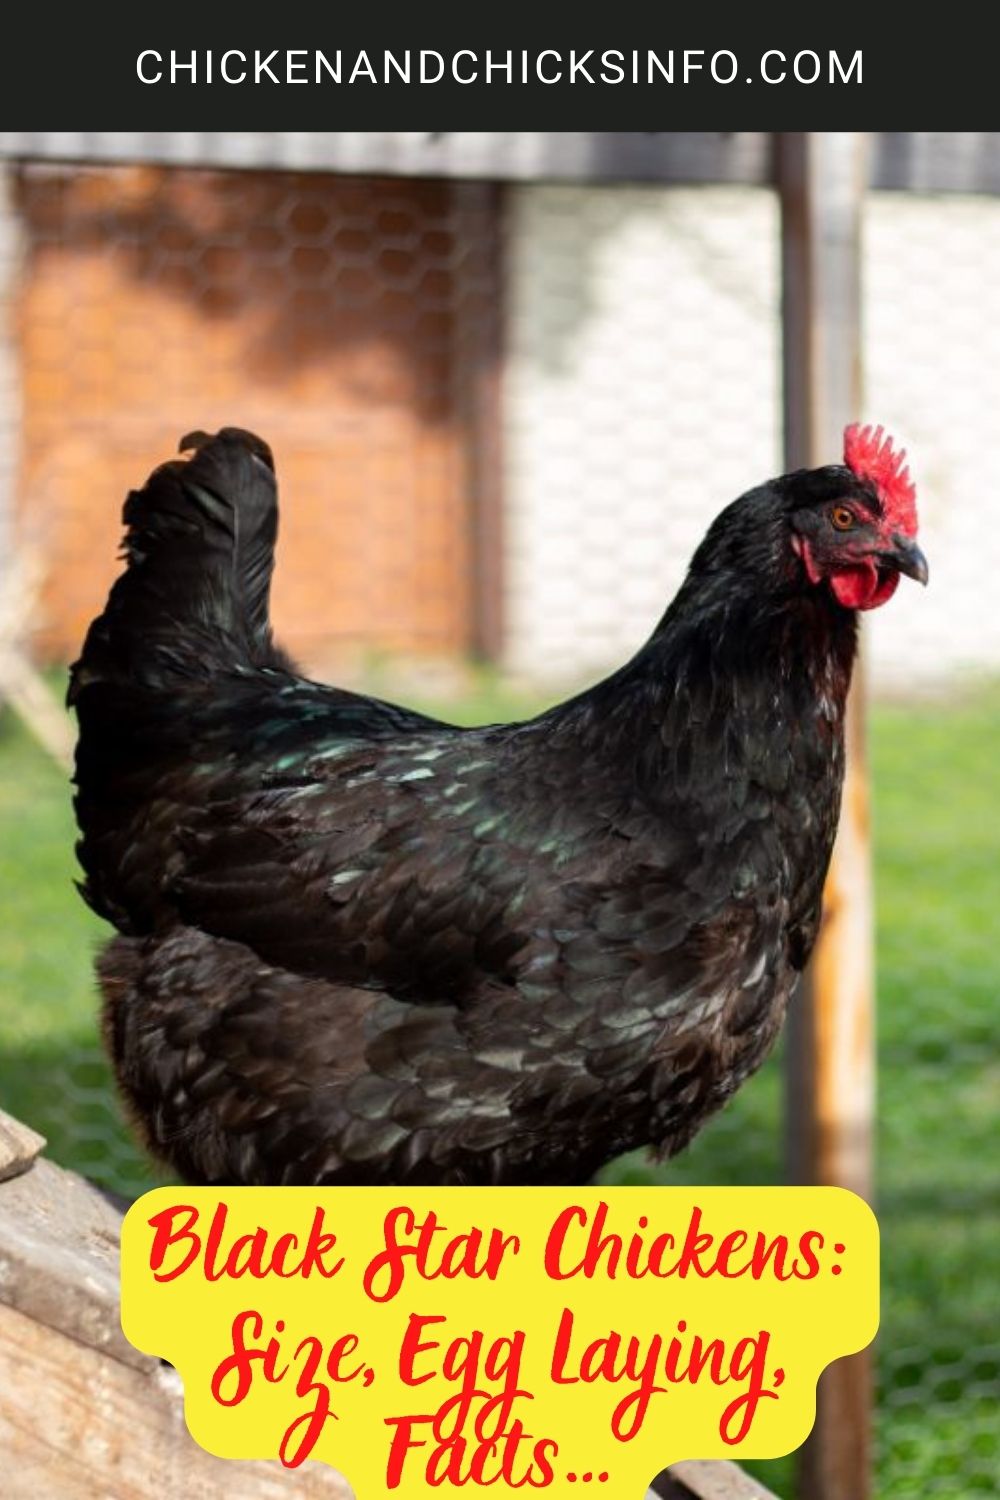 Black Star Chickens: Size, Egg Laying, Facts… poster.
